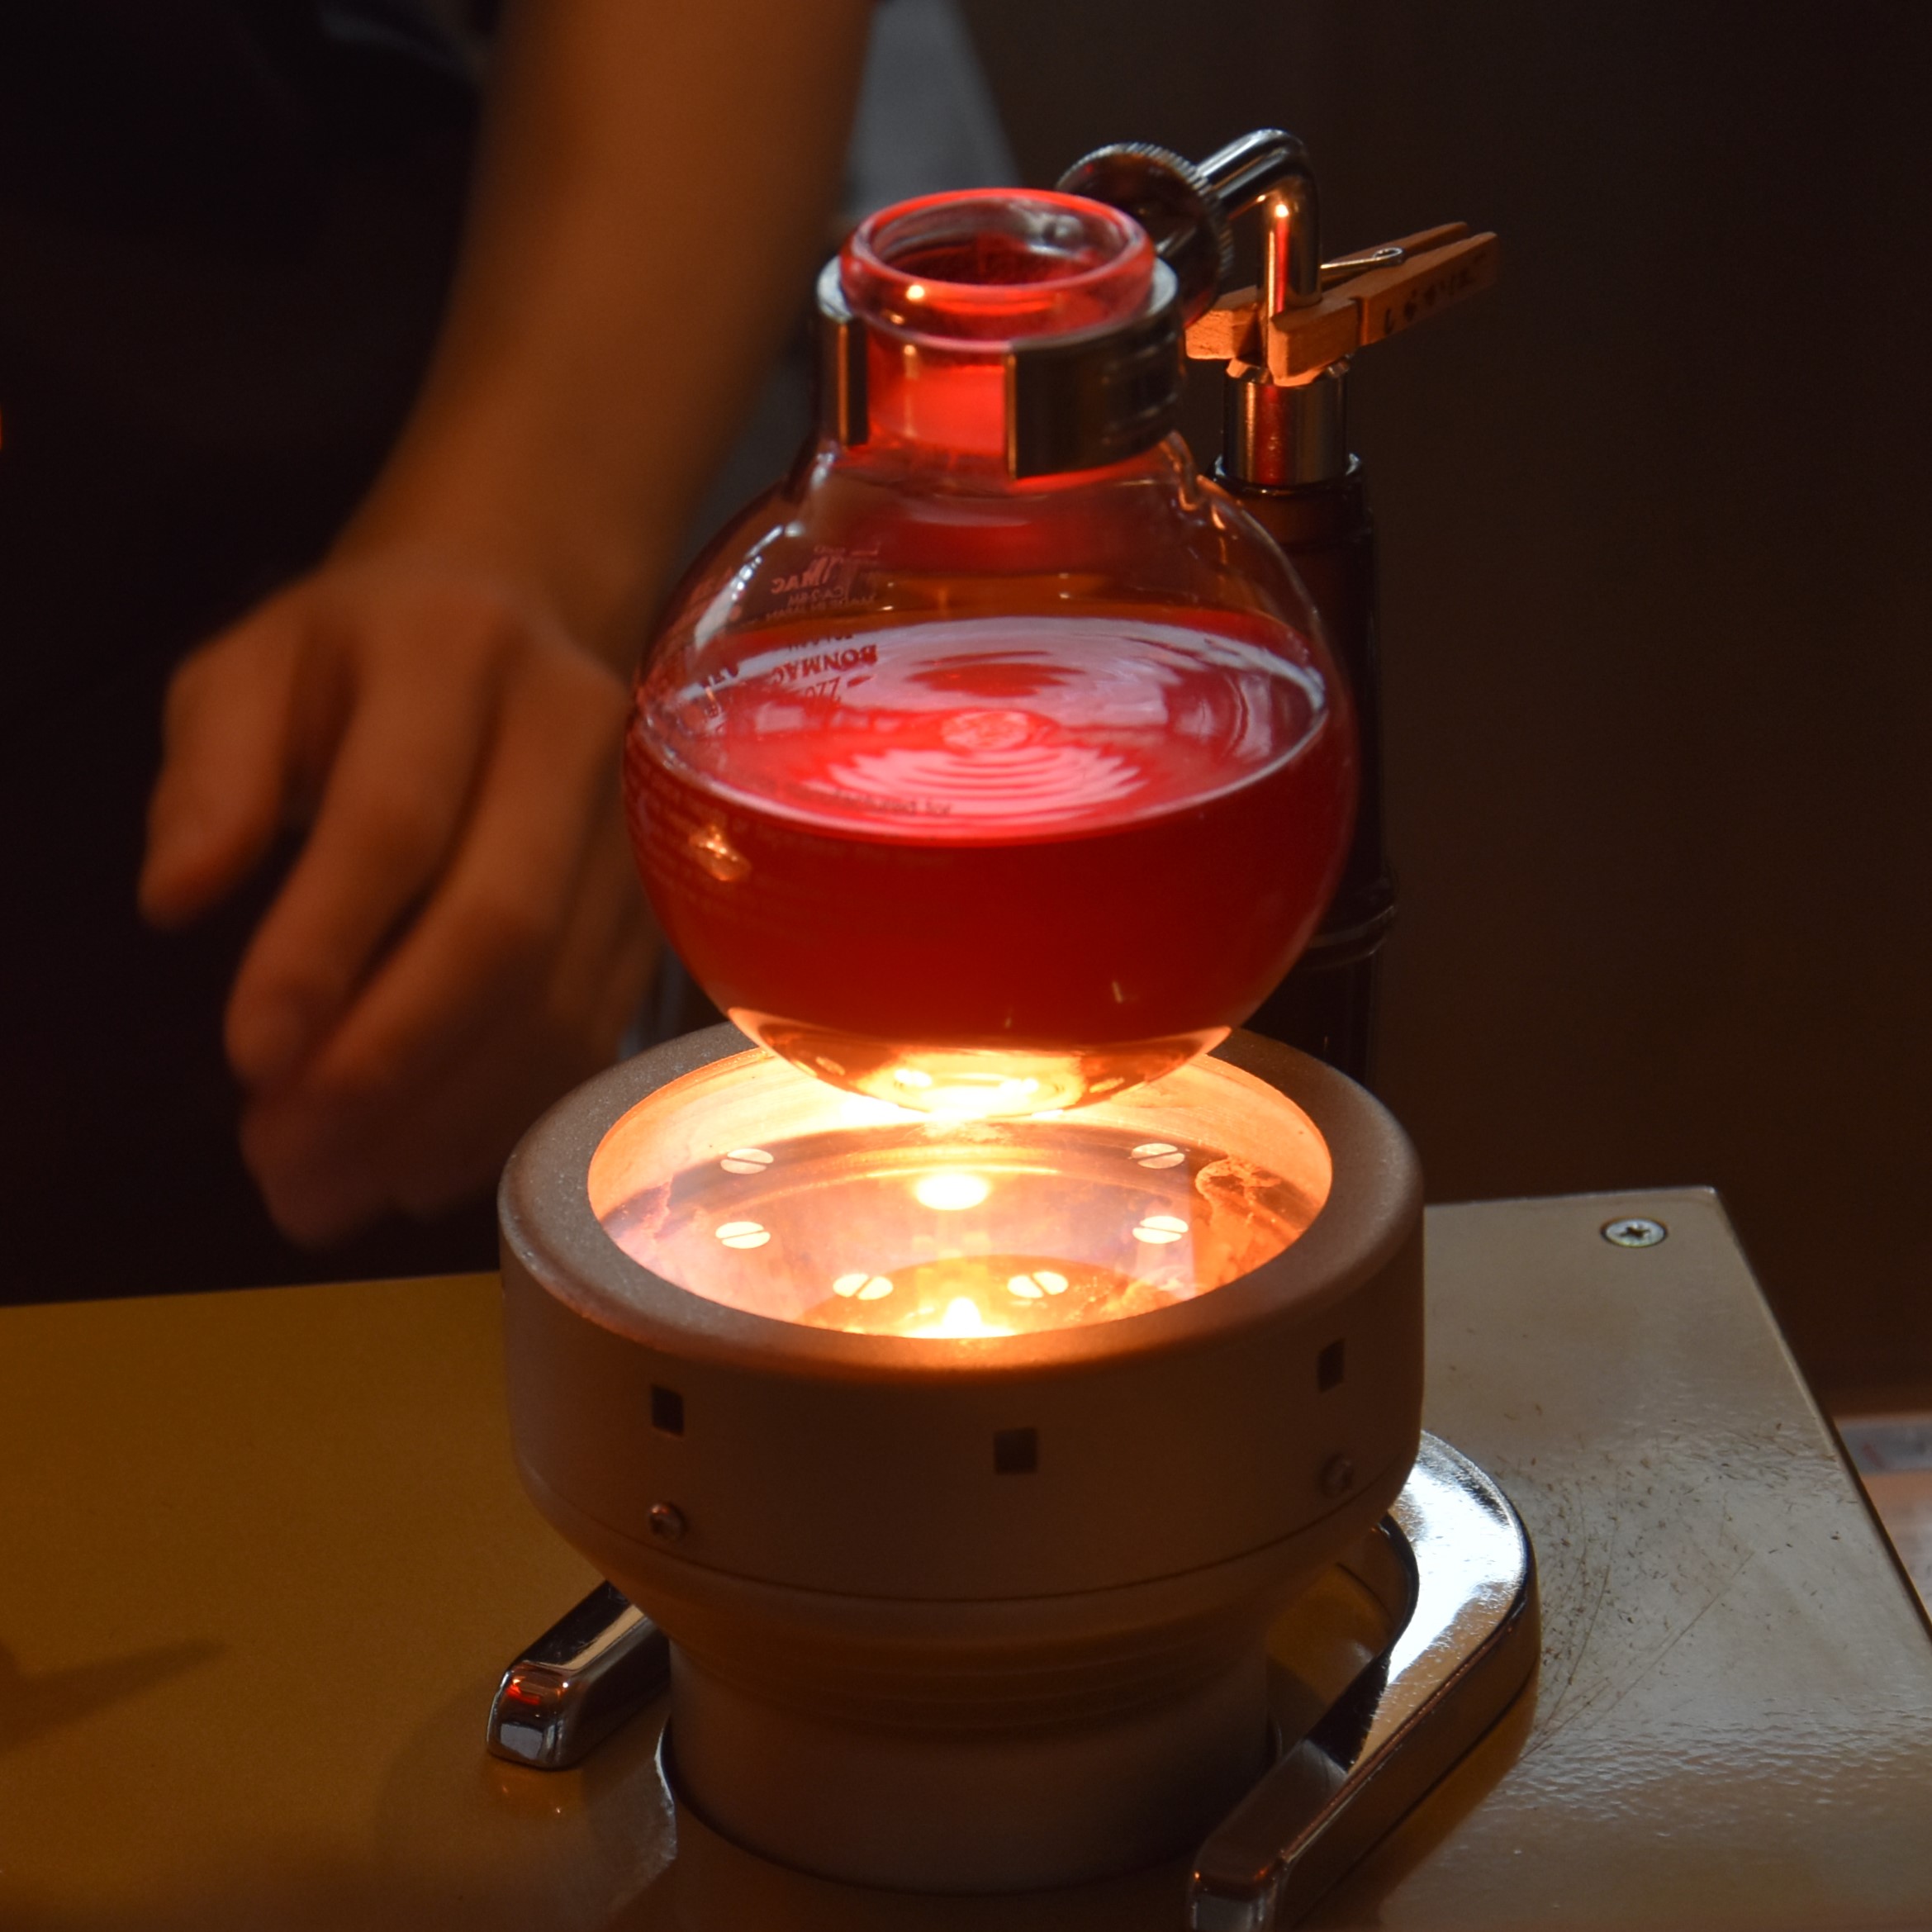 A syphon at Maruyama Coffee in Nagano Station, warming on the infrared heater after brewing.